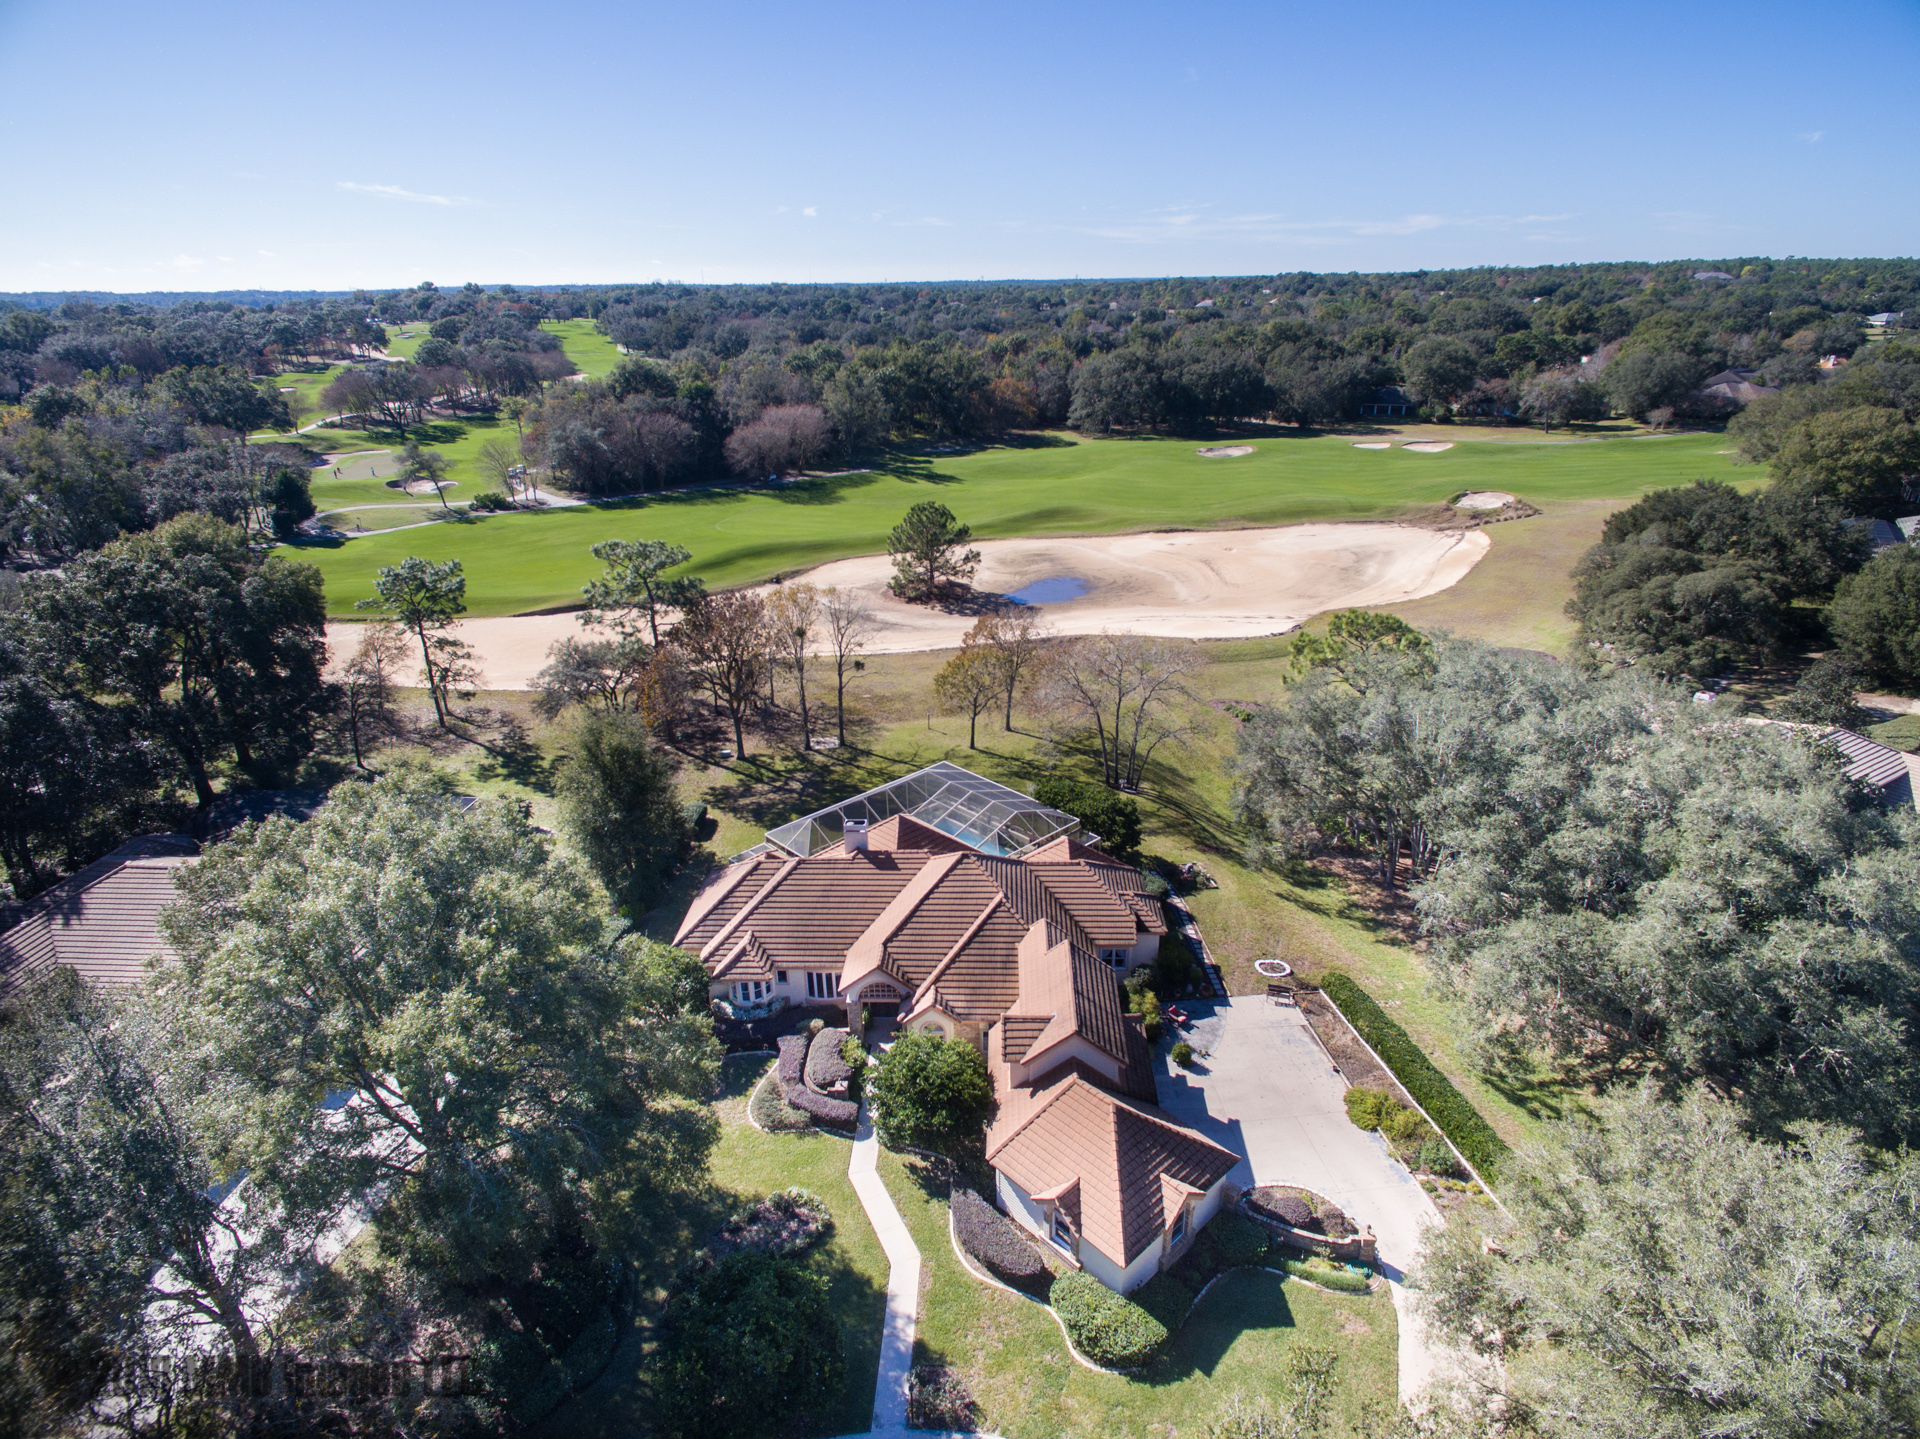 Aerial Photo of this Real Estate Listing Photo for the Real Estate Home for Sale in Black Diamond Ranch, 3841 W. Black Diamond Cir, Lecanto, Citrus County, FL 34461